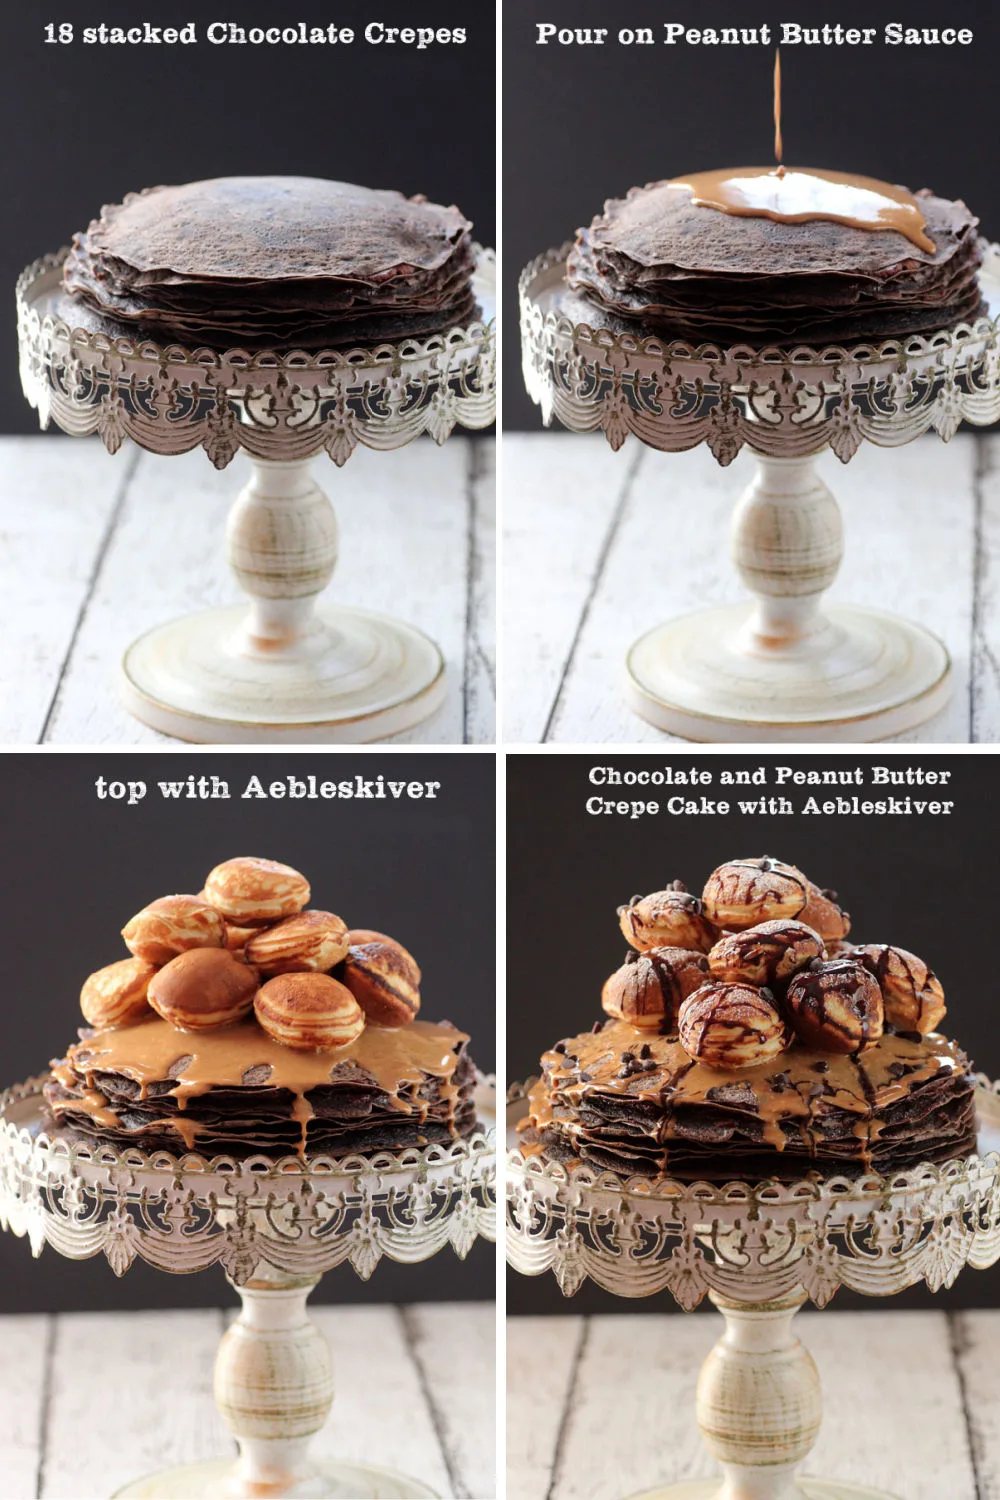 Collage image on how to assemble the chocolate and peanut butter crepe cake.